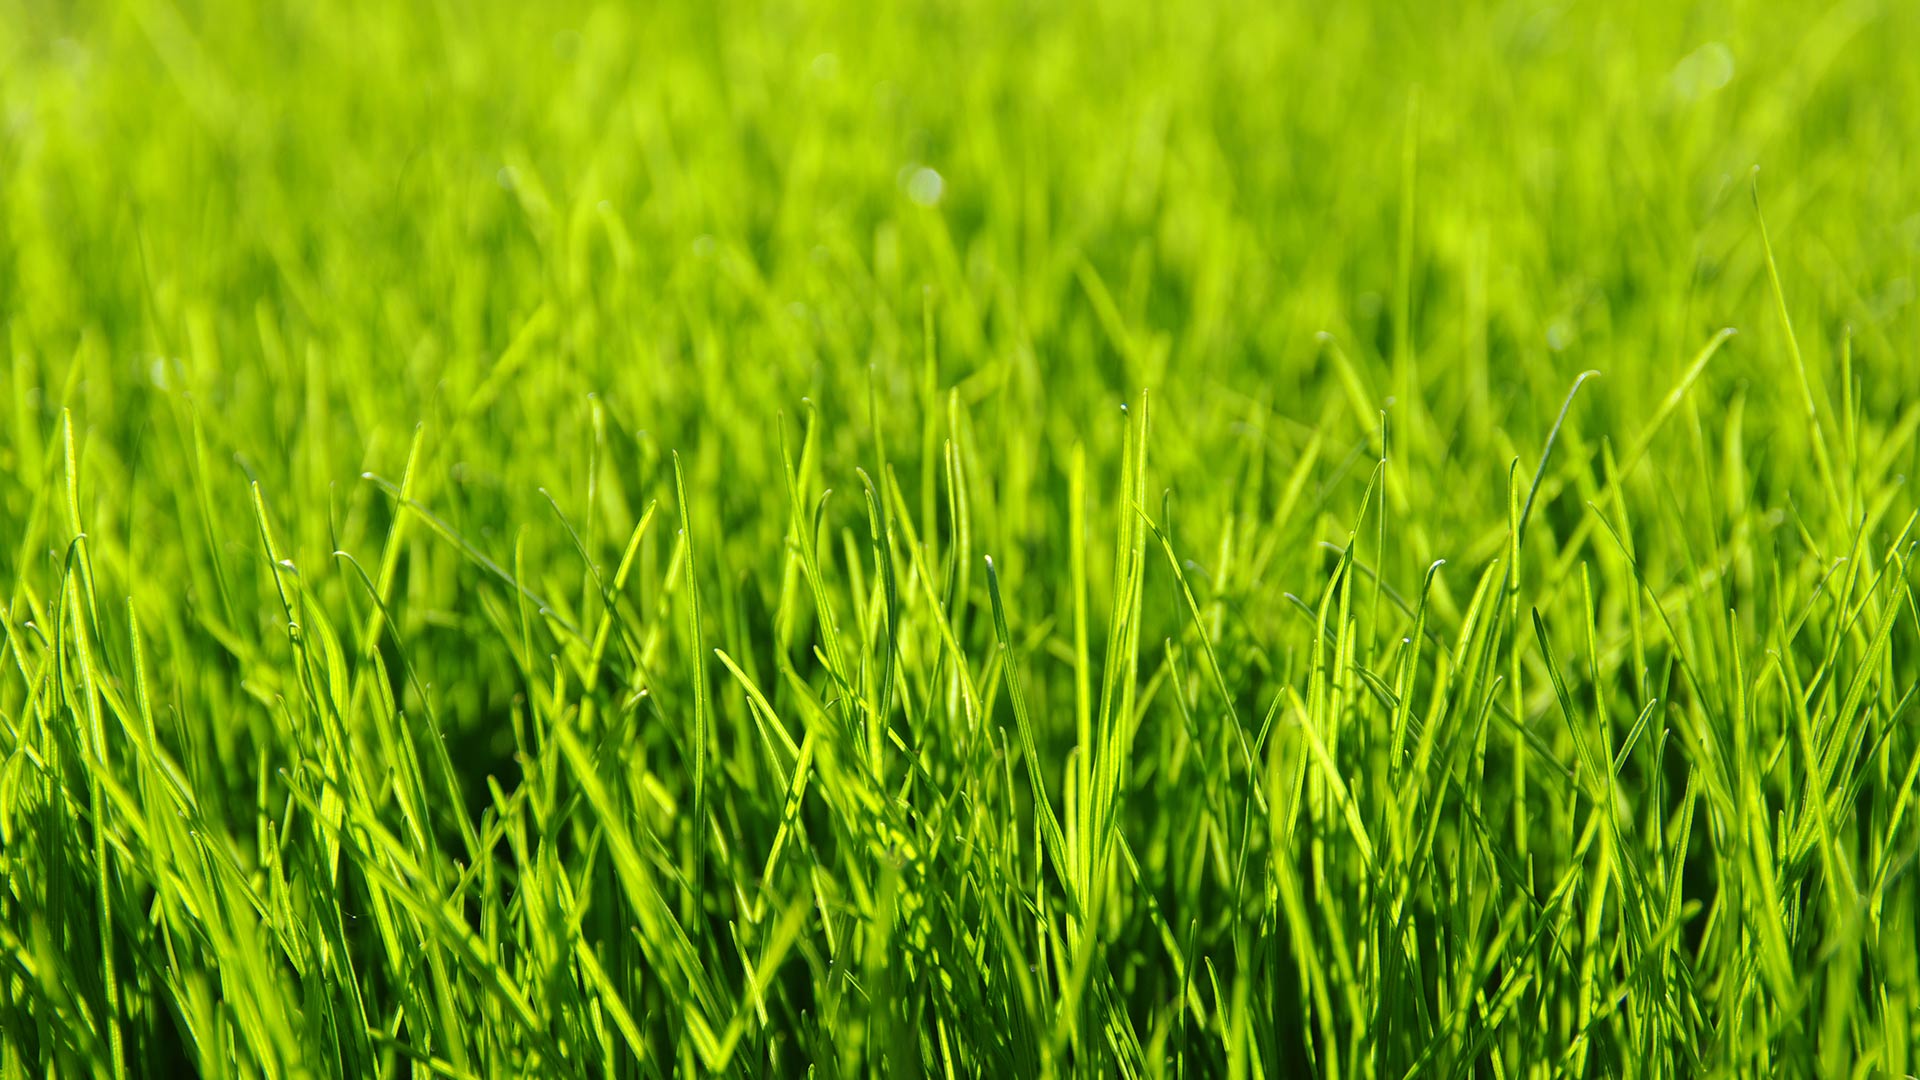 Healthy lawn from lawn care services performed from Stiles Lawn, Landscaping & Snow Removal Inc. in Lansing, MI.